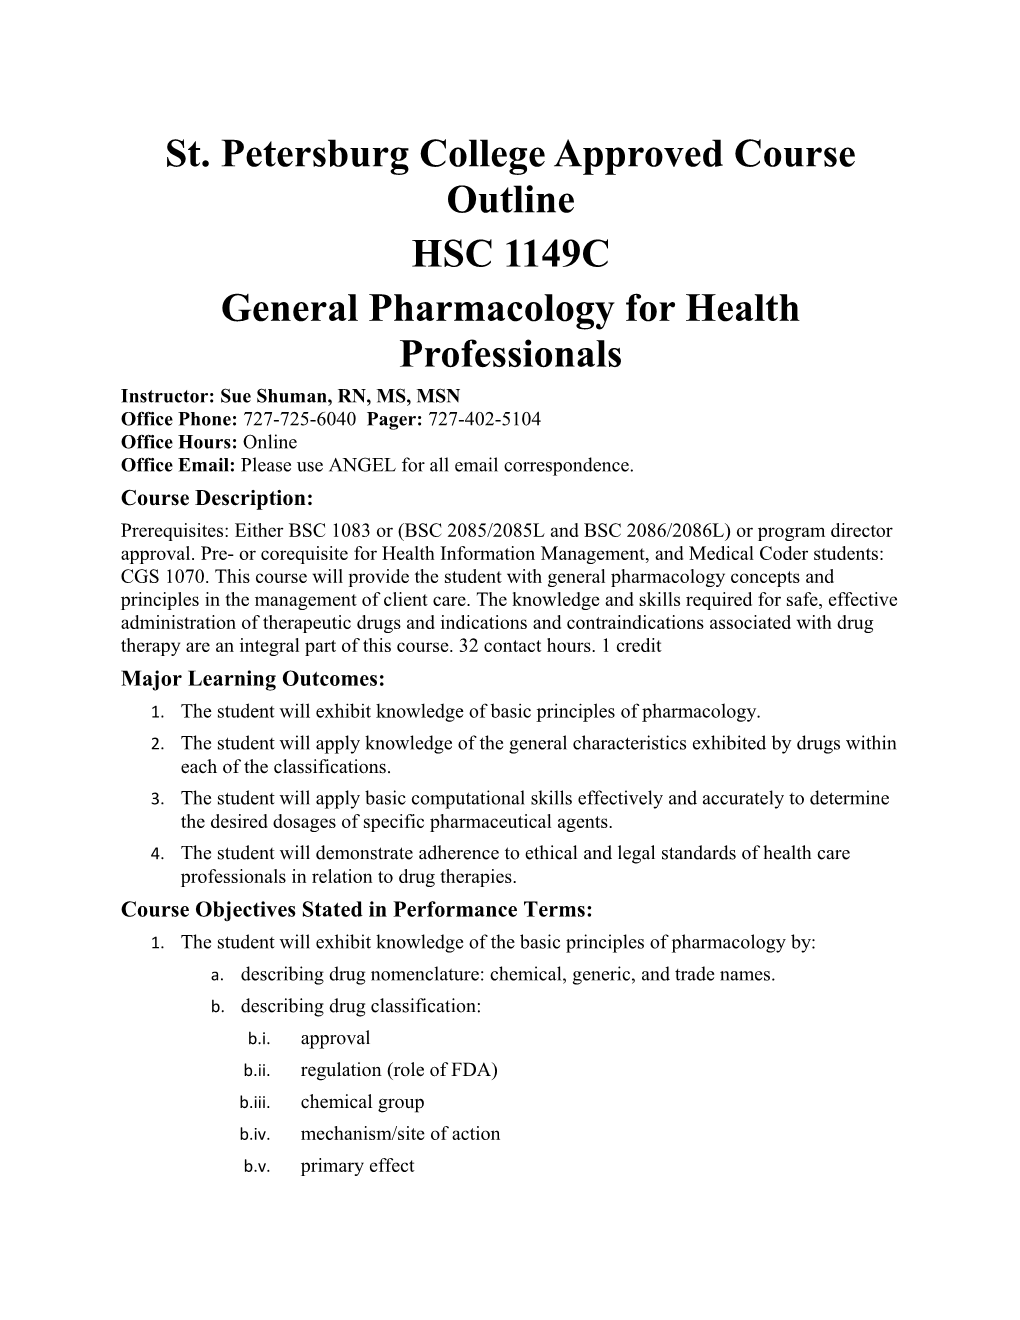 St. Petersburg College Approved Course Outline